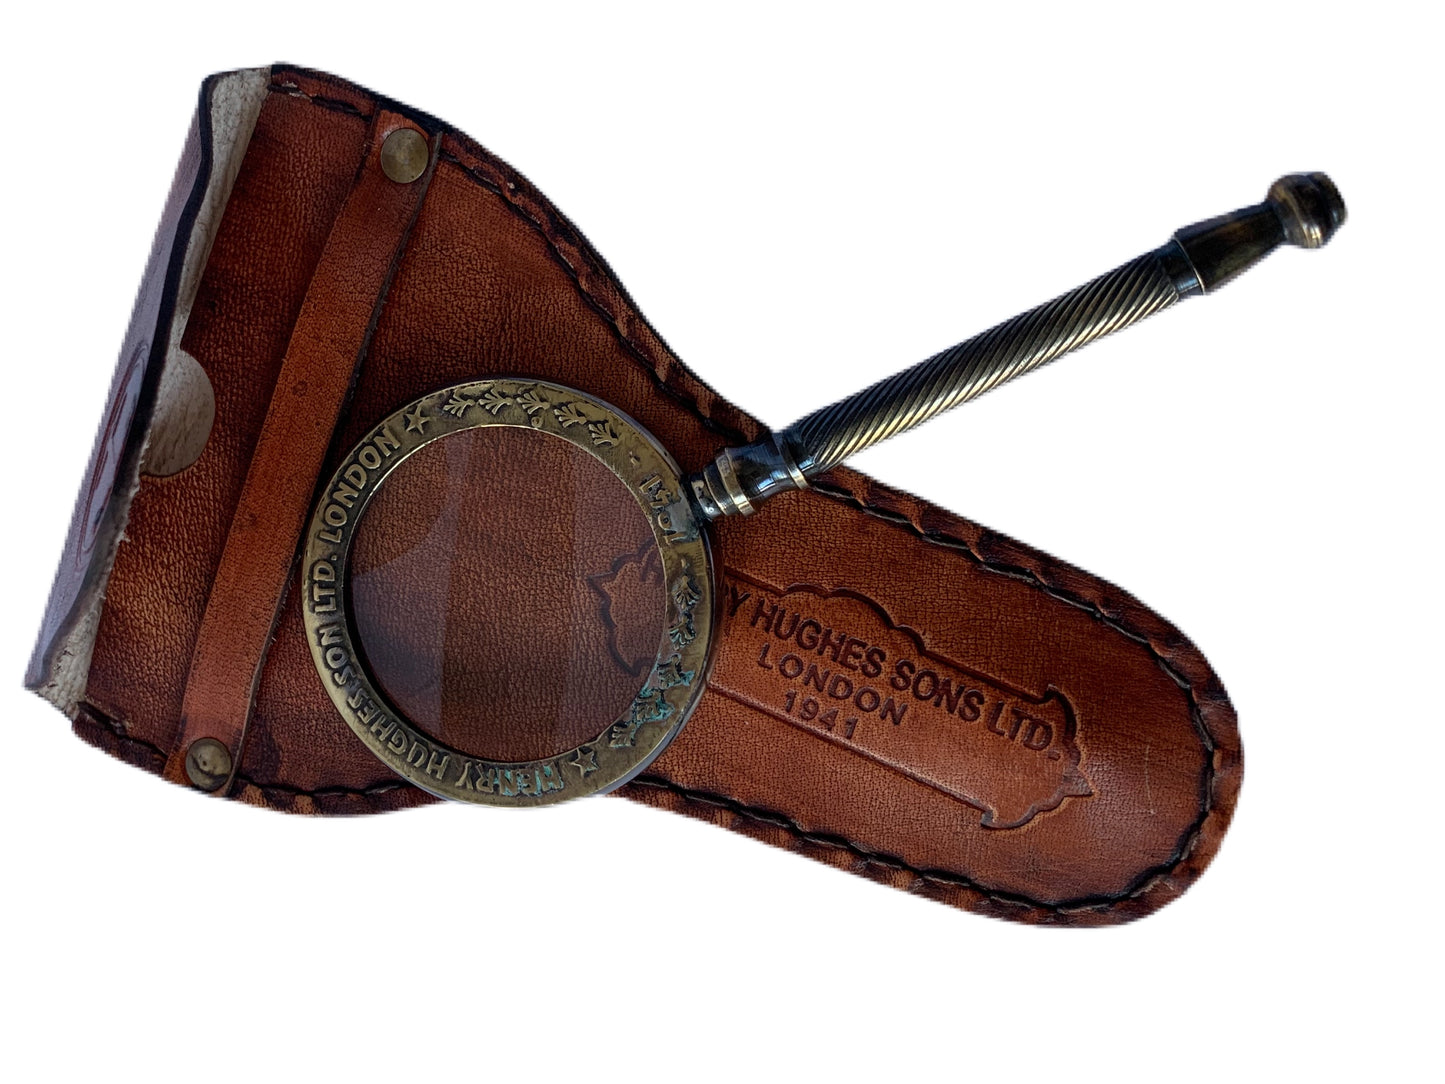 Magnifier - small with leather case